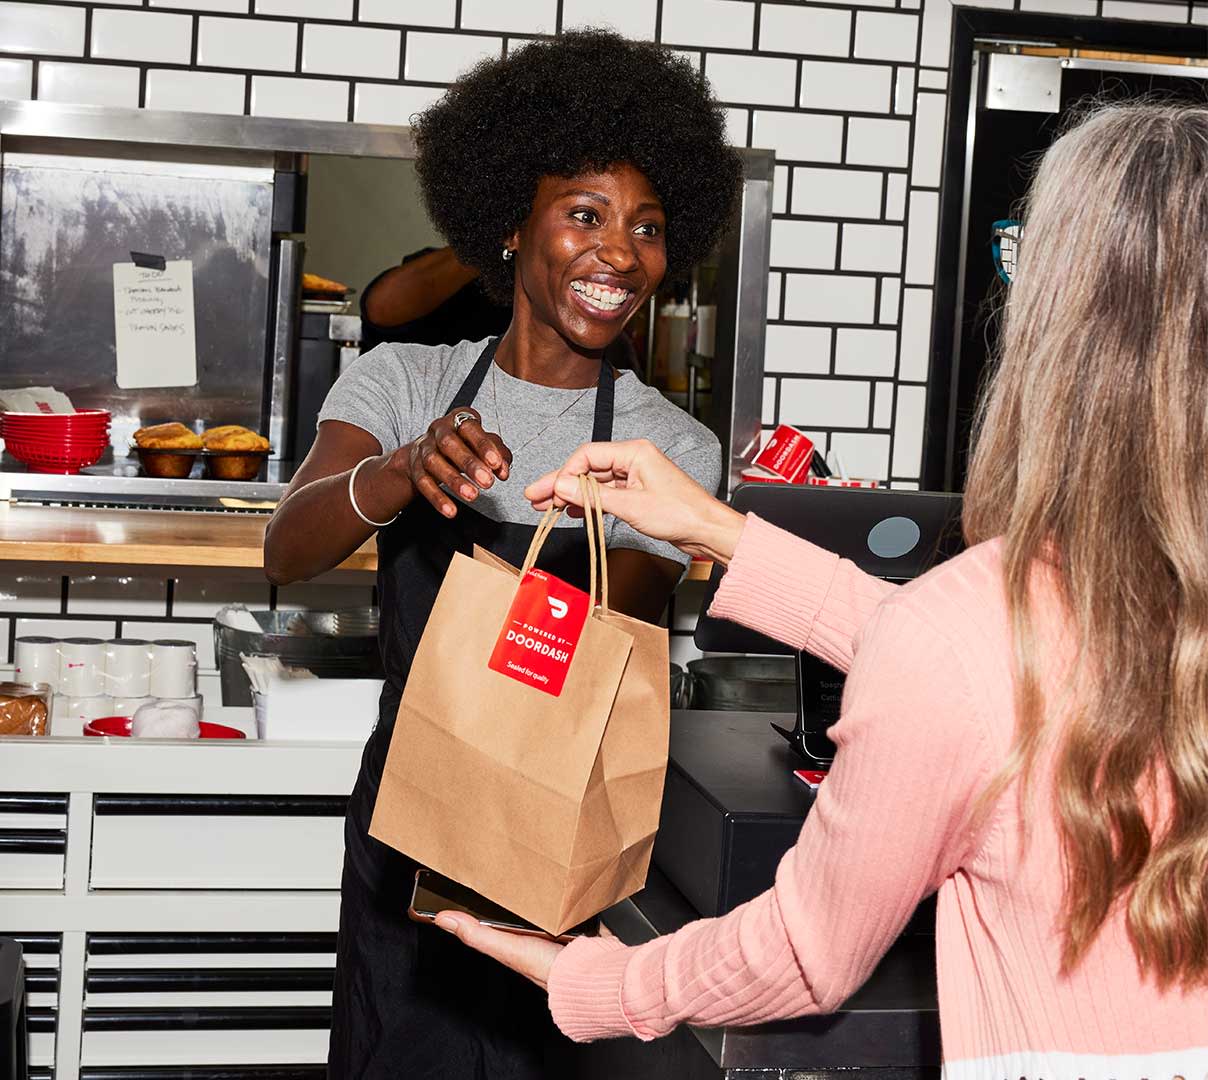 Dx Blog - How to Pick Up a DoorDash Order: Finding Your Way Around Any Restaurant - counter pickup